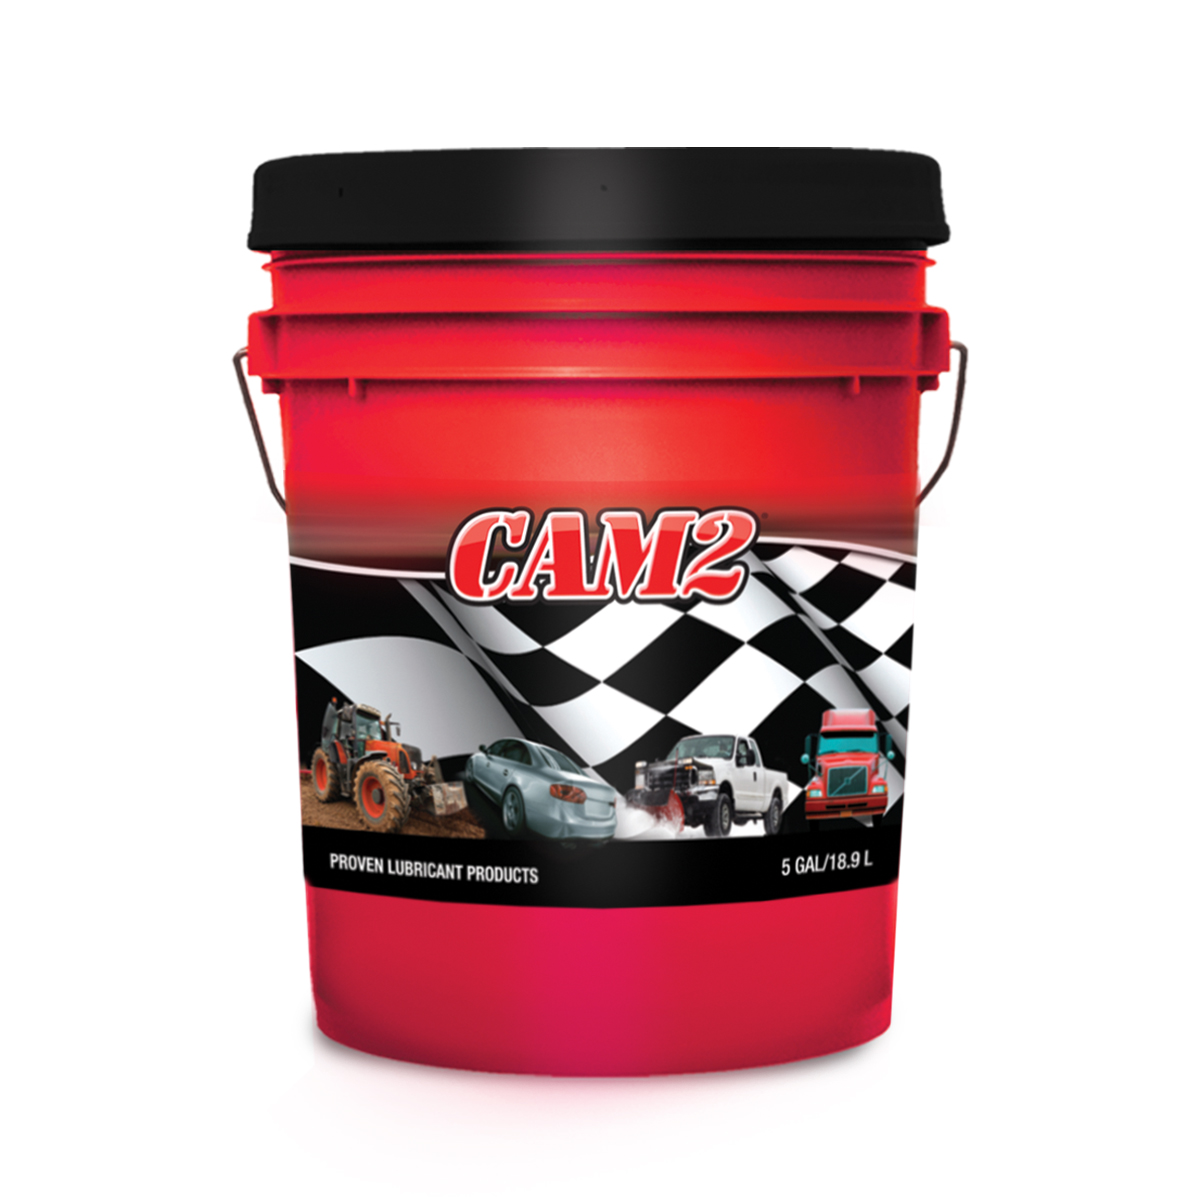 CAM2 ULTRA580 EP #2 GREASE CALCIUM SULFONATE WITH 5% MOLY 80565-267